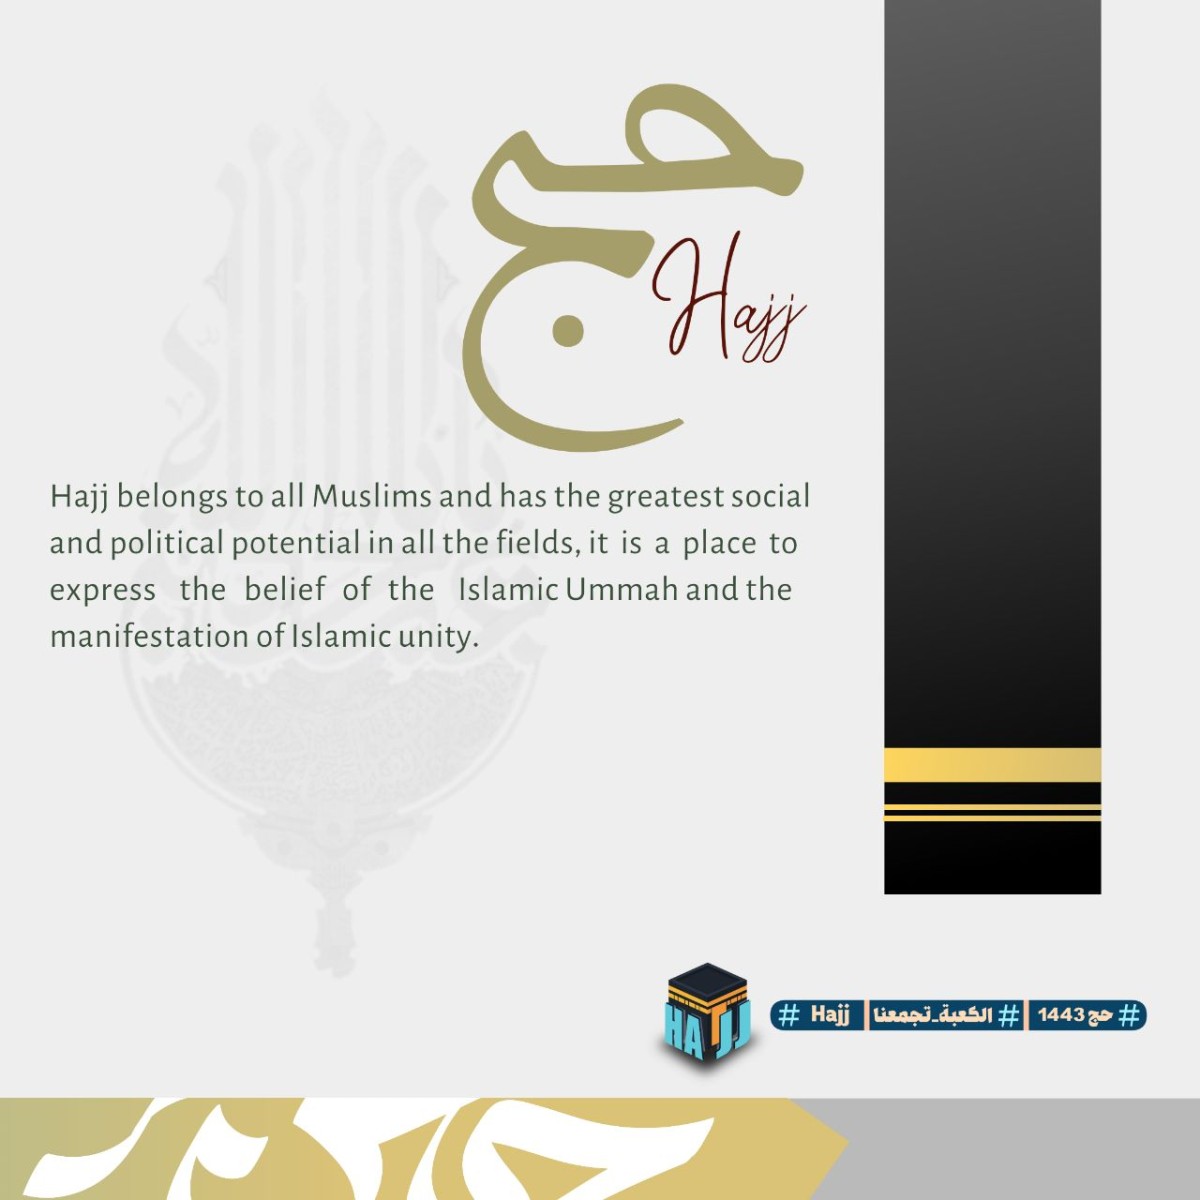 hajj belongs to all Muslims and has the greatest social and political potential in all the fields